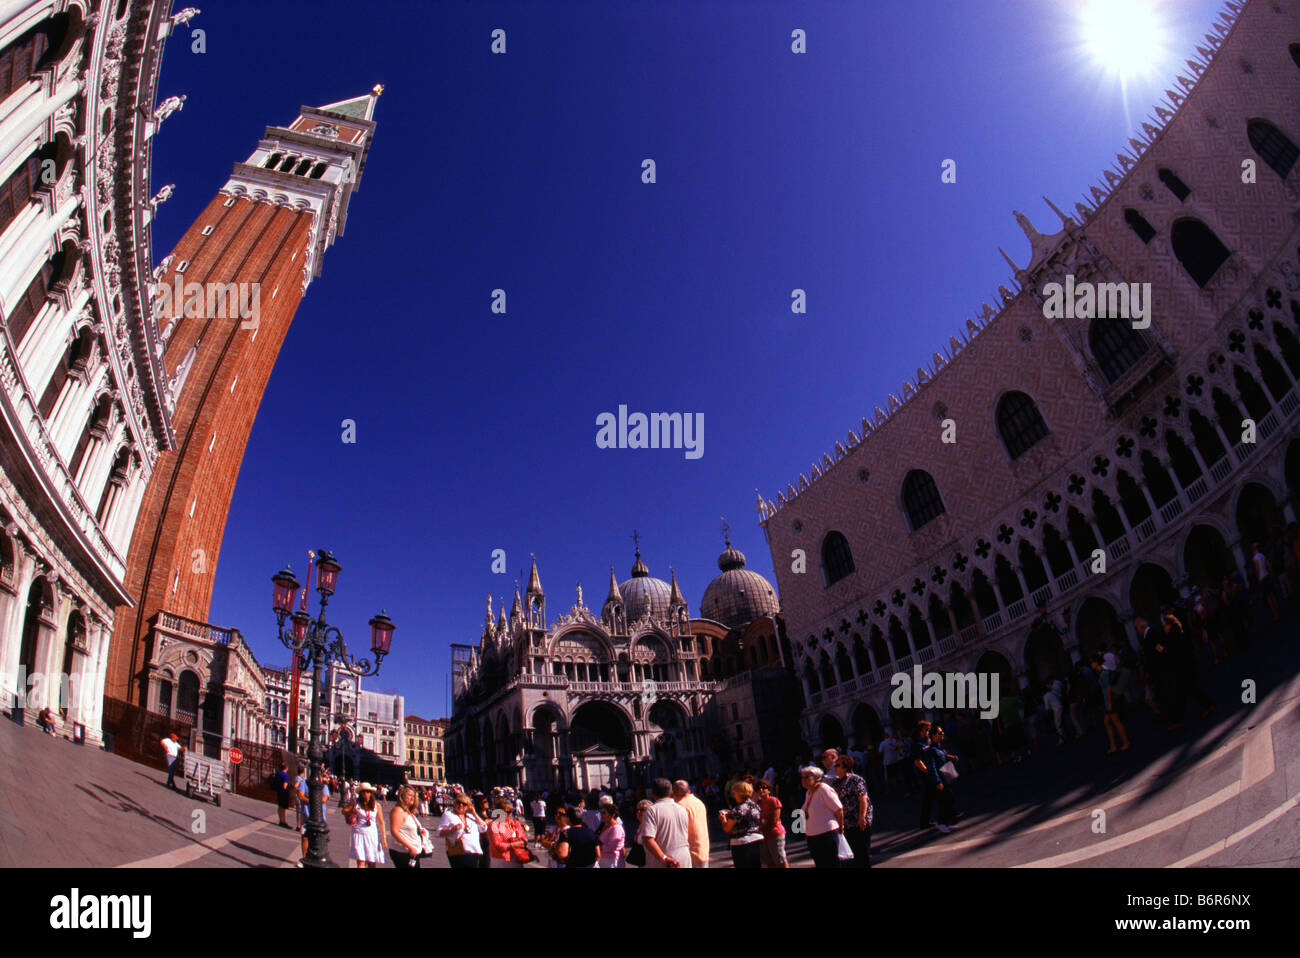 Tourists on St Mark's Square in Venice, Italy, with Campanile bell tower, Basilica di San Marco and Palazzo Ducale Doges Palace. Stock Photo